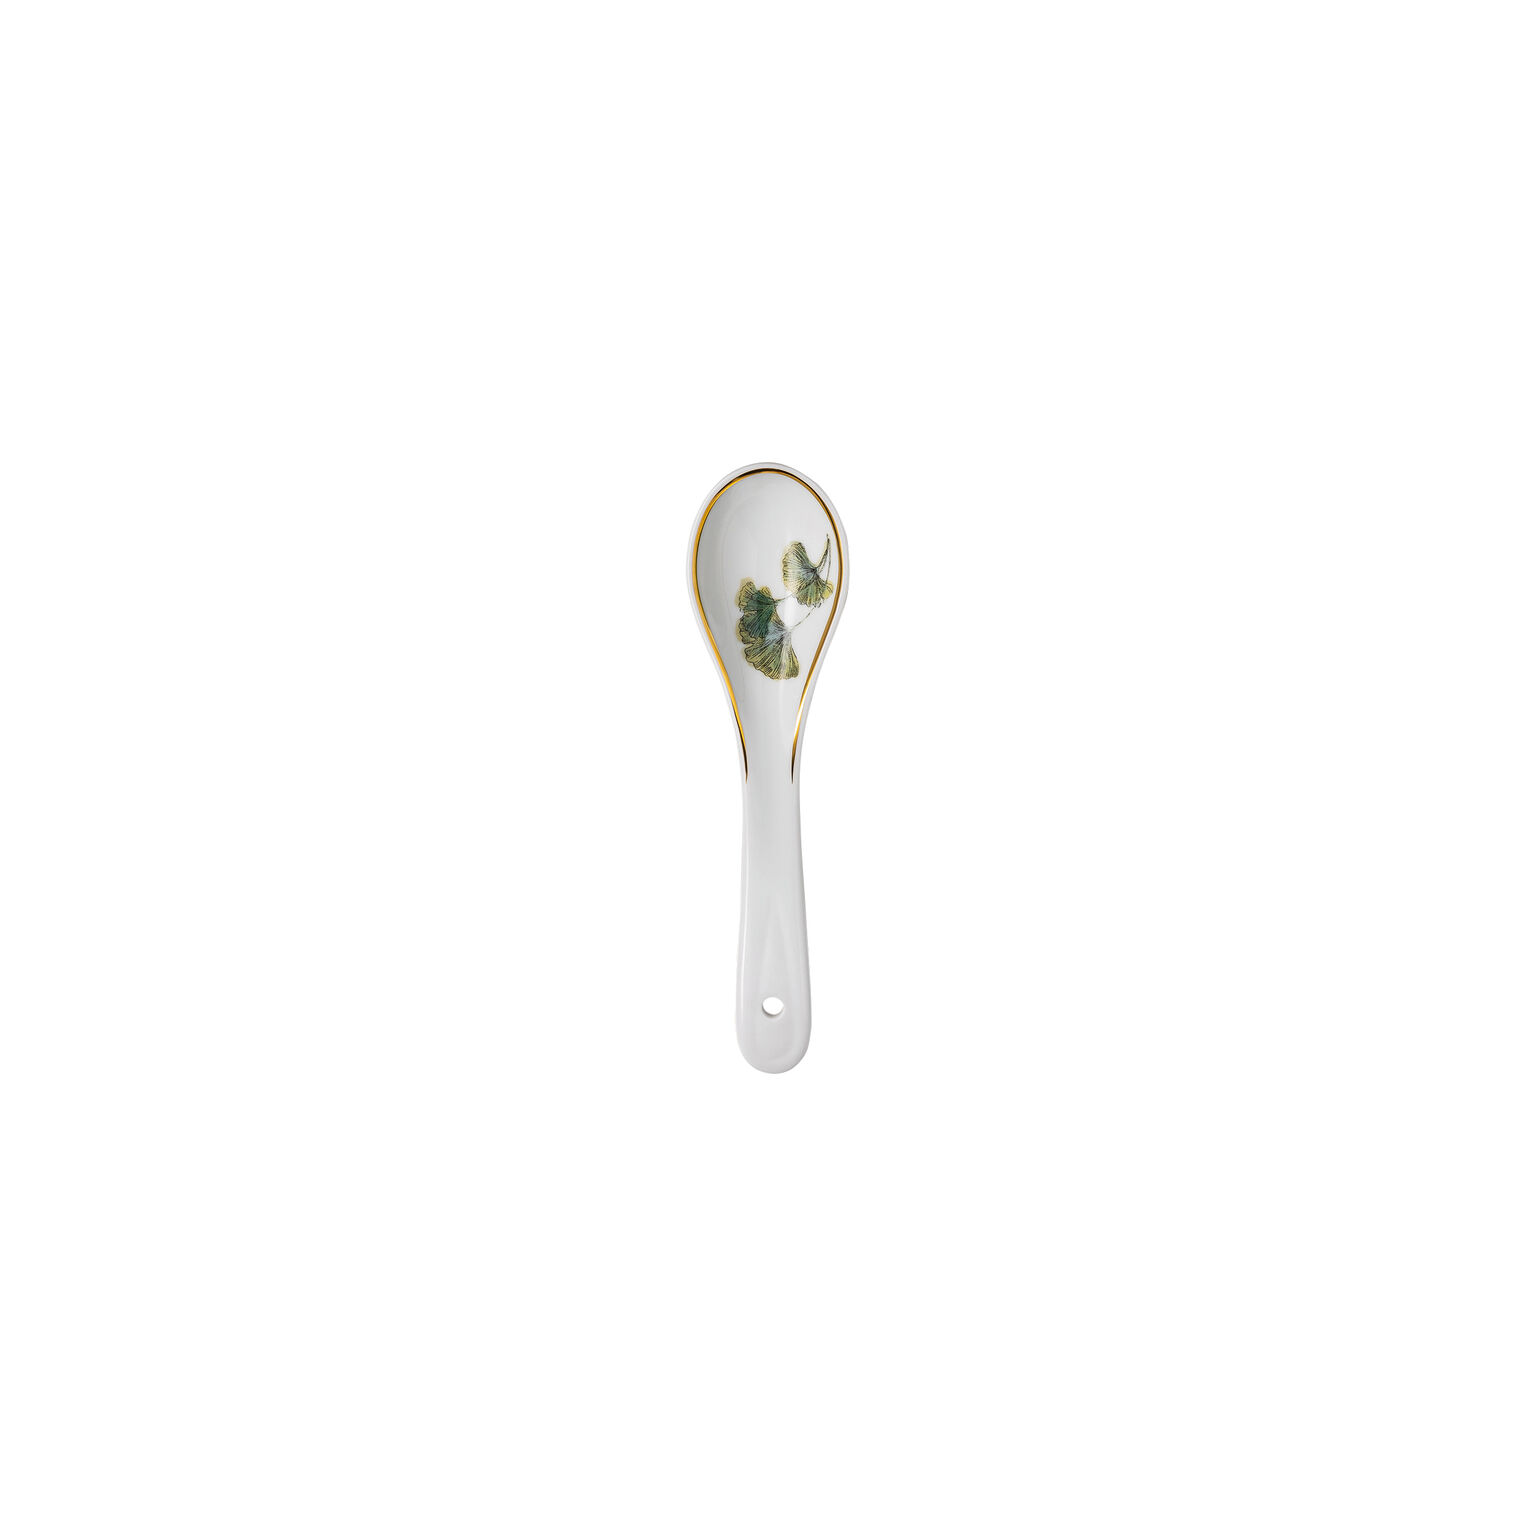 Details about   C884 ⭐⭐Rosenthal Classic Rose Romance 1 Menu Spoons Silver Plated 90 Spoon ⭐⭐ 